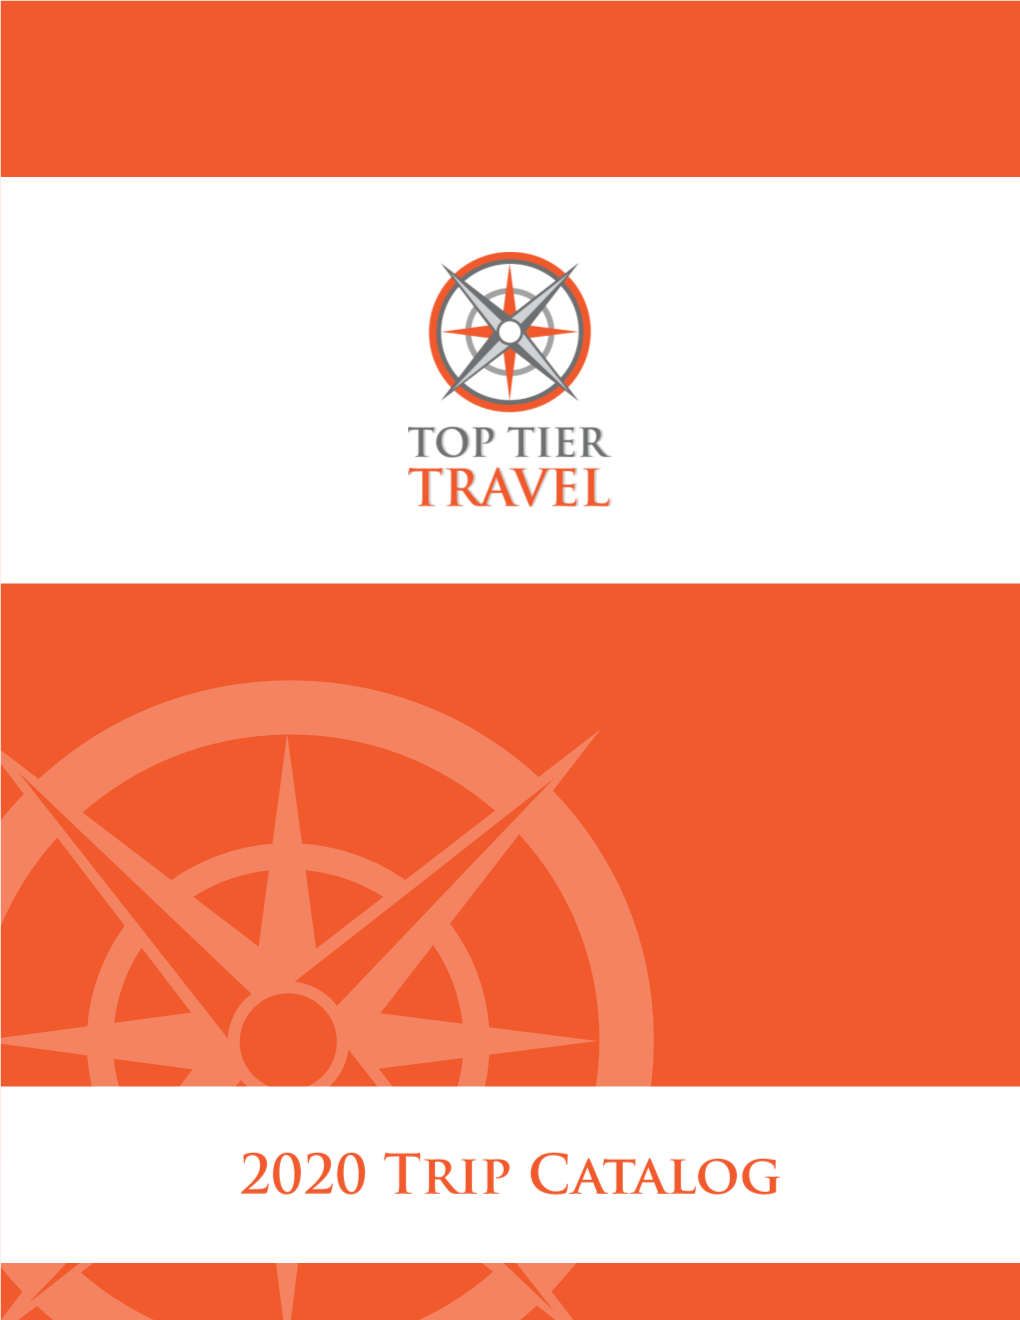 View Our 2020 Trip Catalog